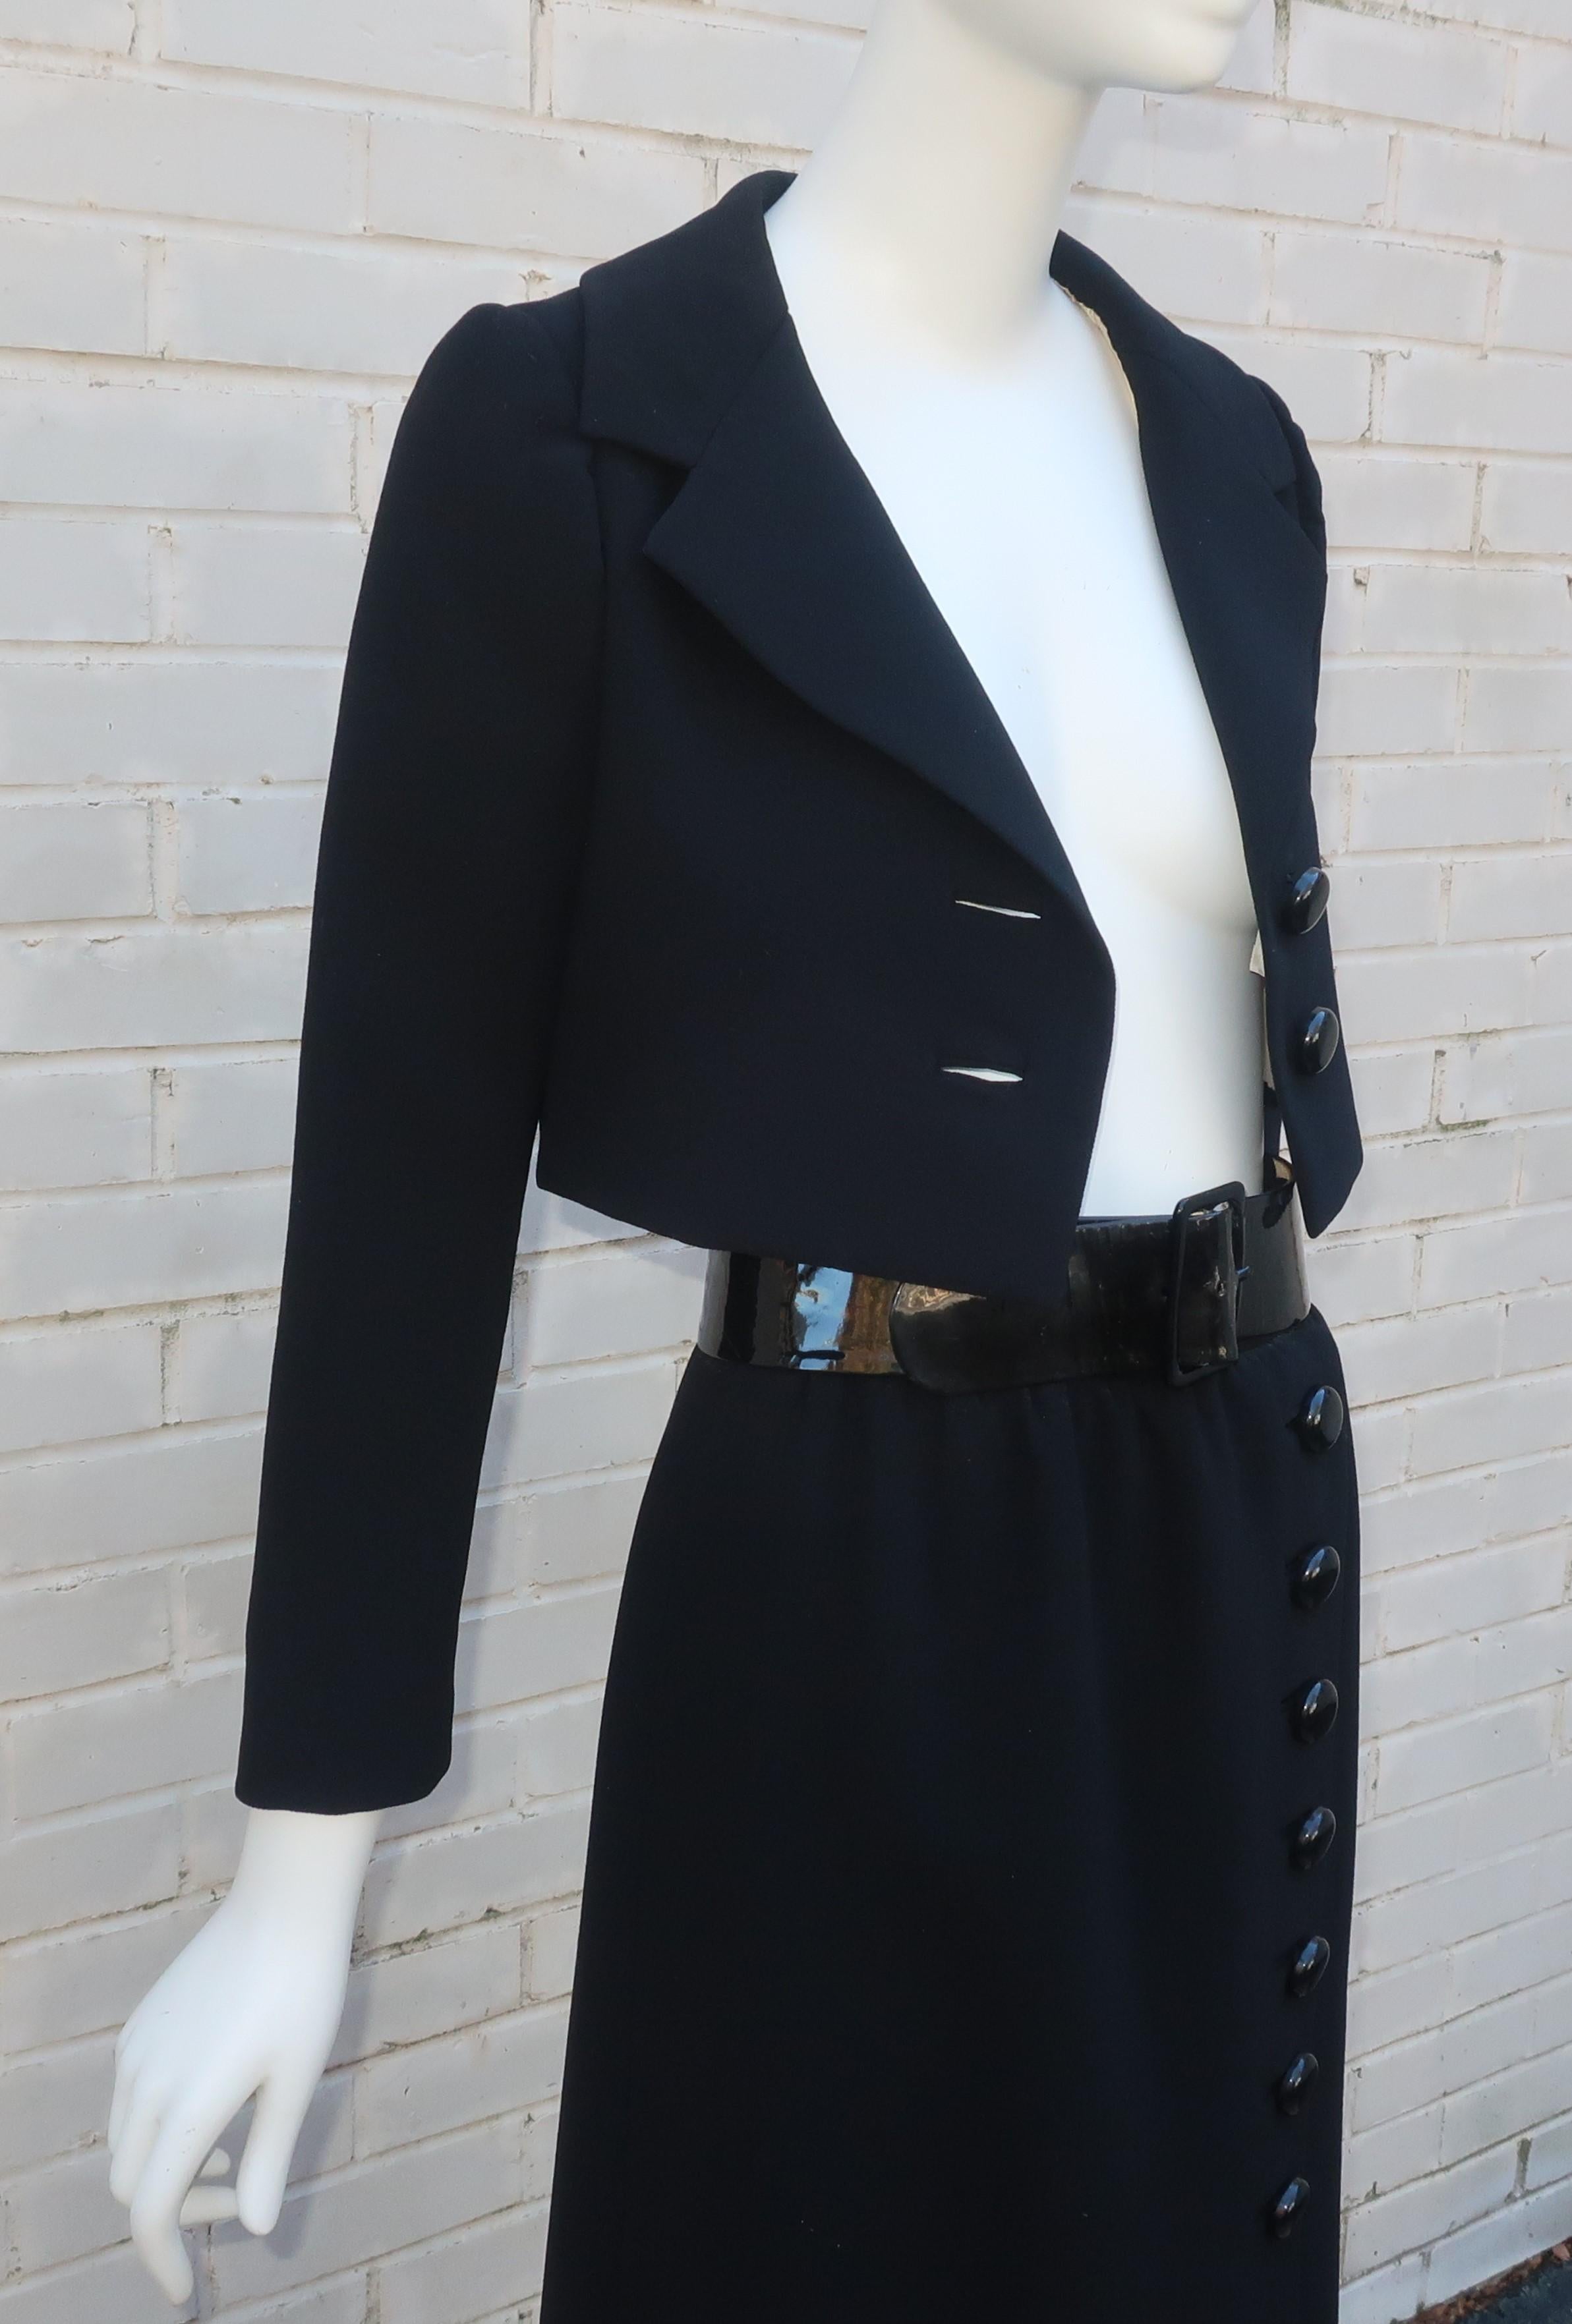 Norman Norell Belted Maxi Skirt Evening Suit With Cropped Jacket, 1968 For Sale 3